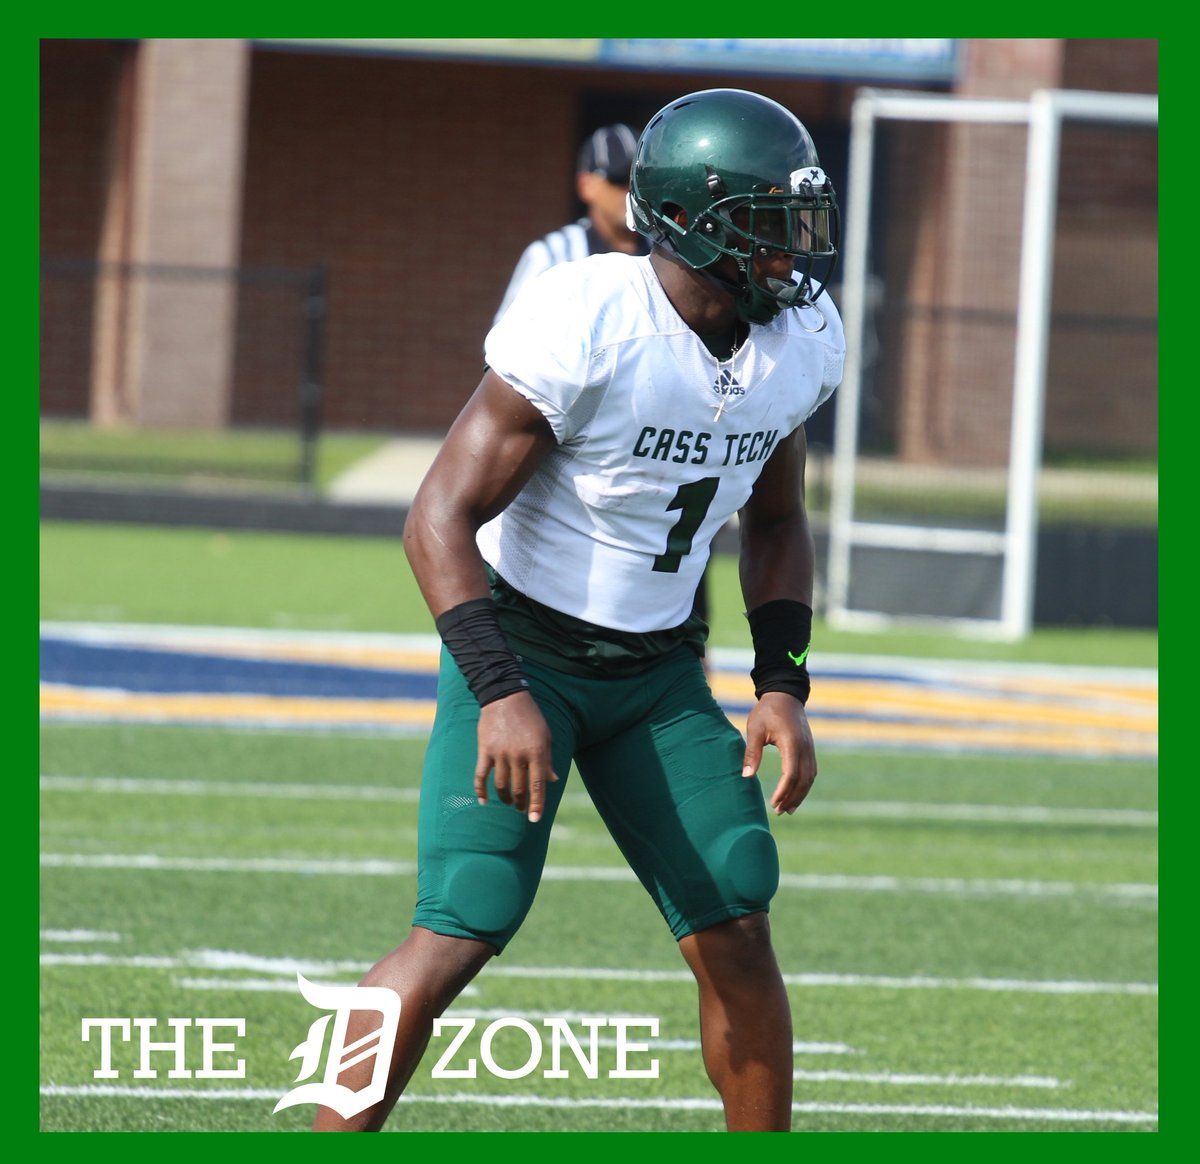 The D Zone Cass Tech 21 Lb Rb Kobe King Picked Up Offers This Past Off Season King Will Return As 1 Of The Top In State Lb Prospects T Co 6xeatpg2tj T Co Rlis8v2puf